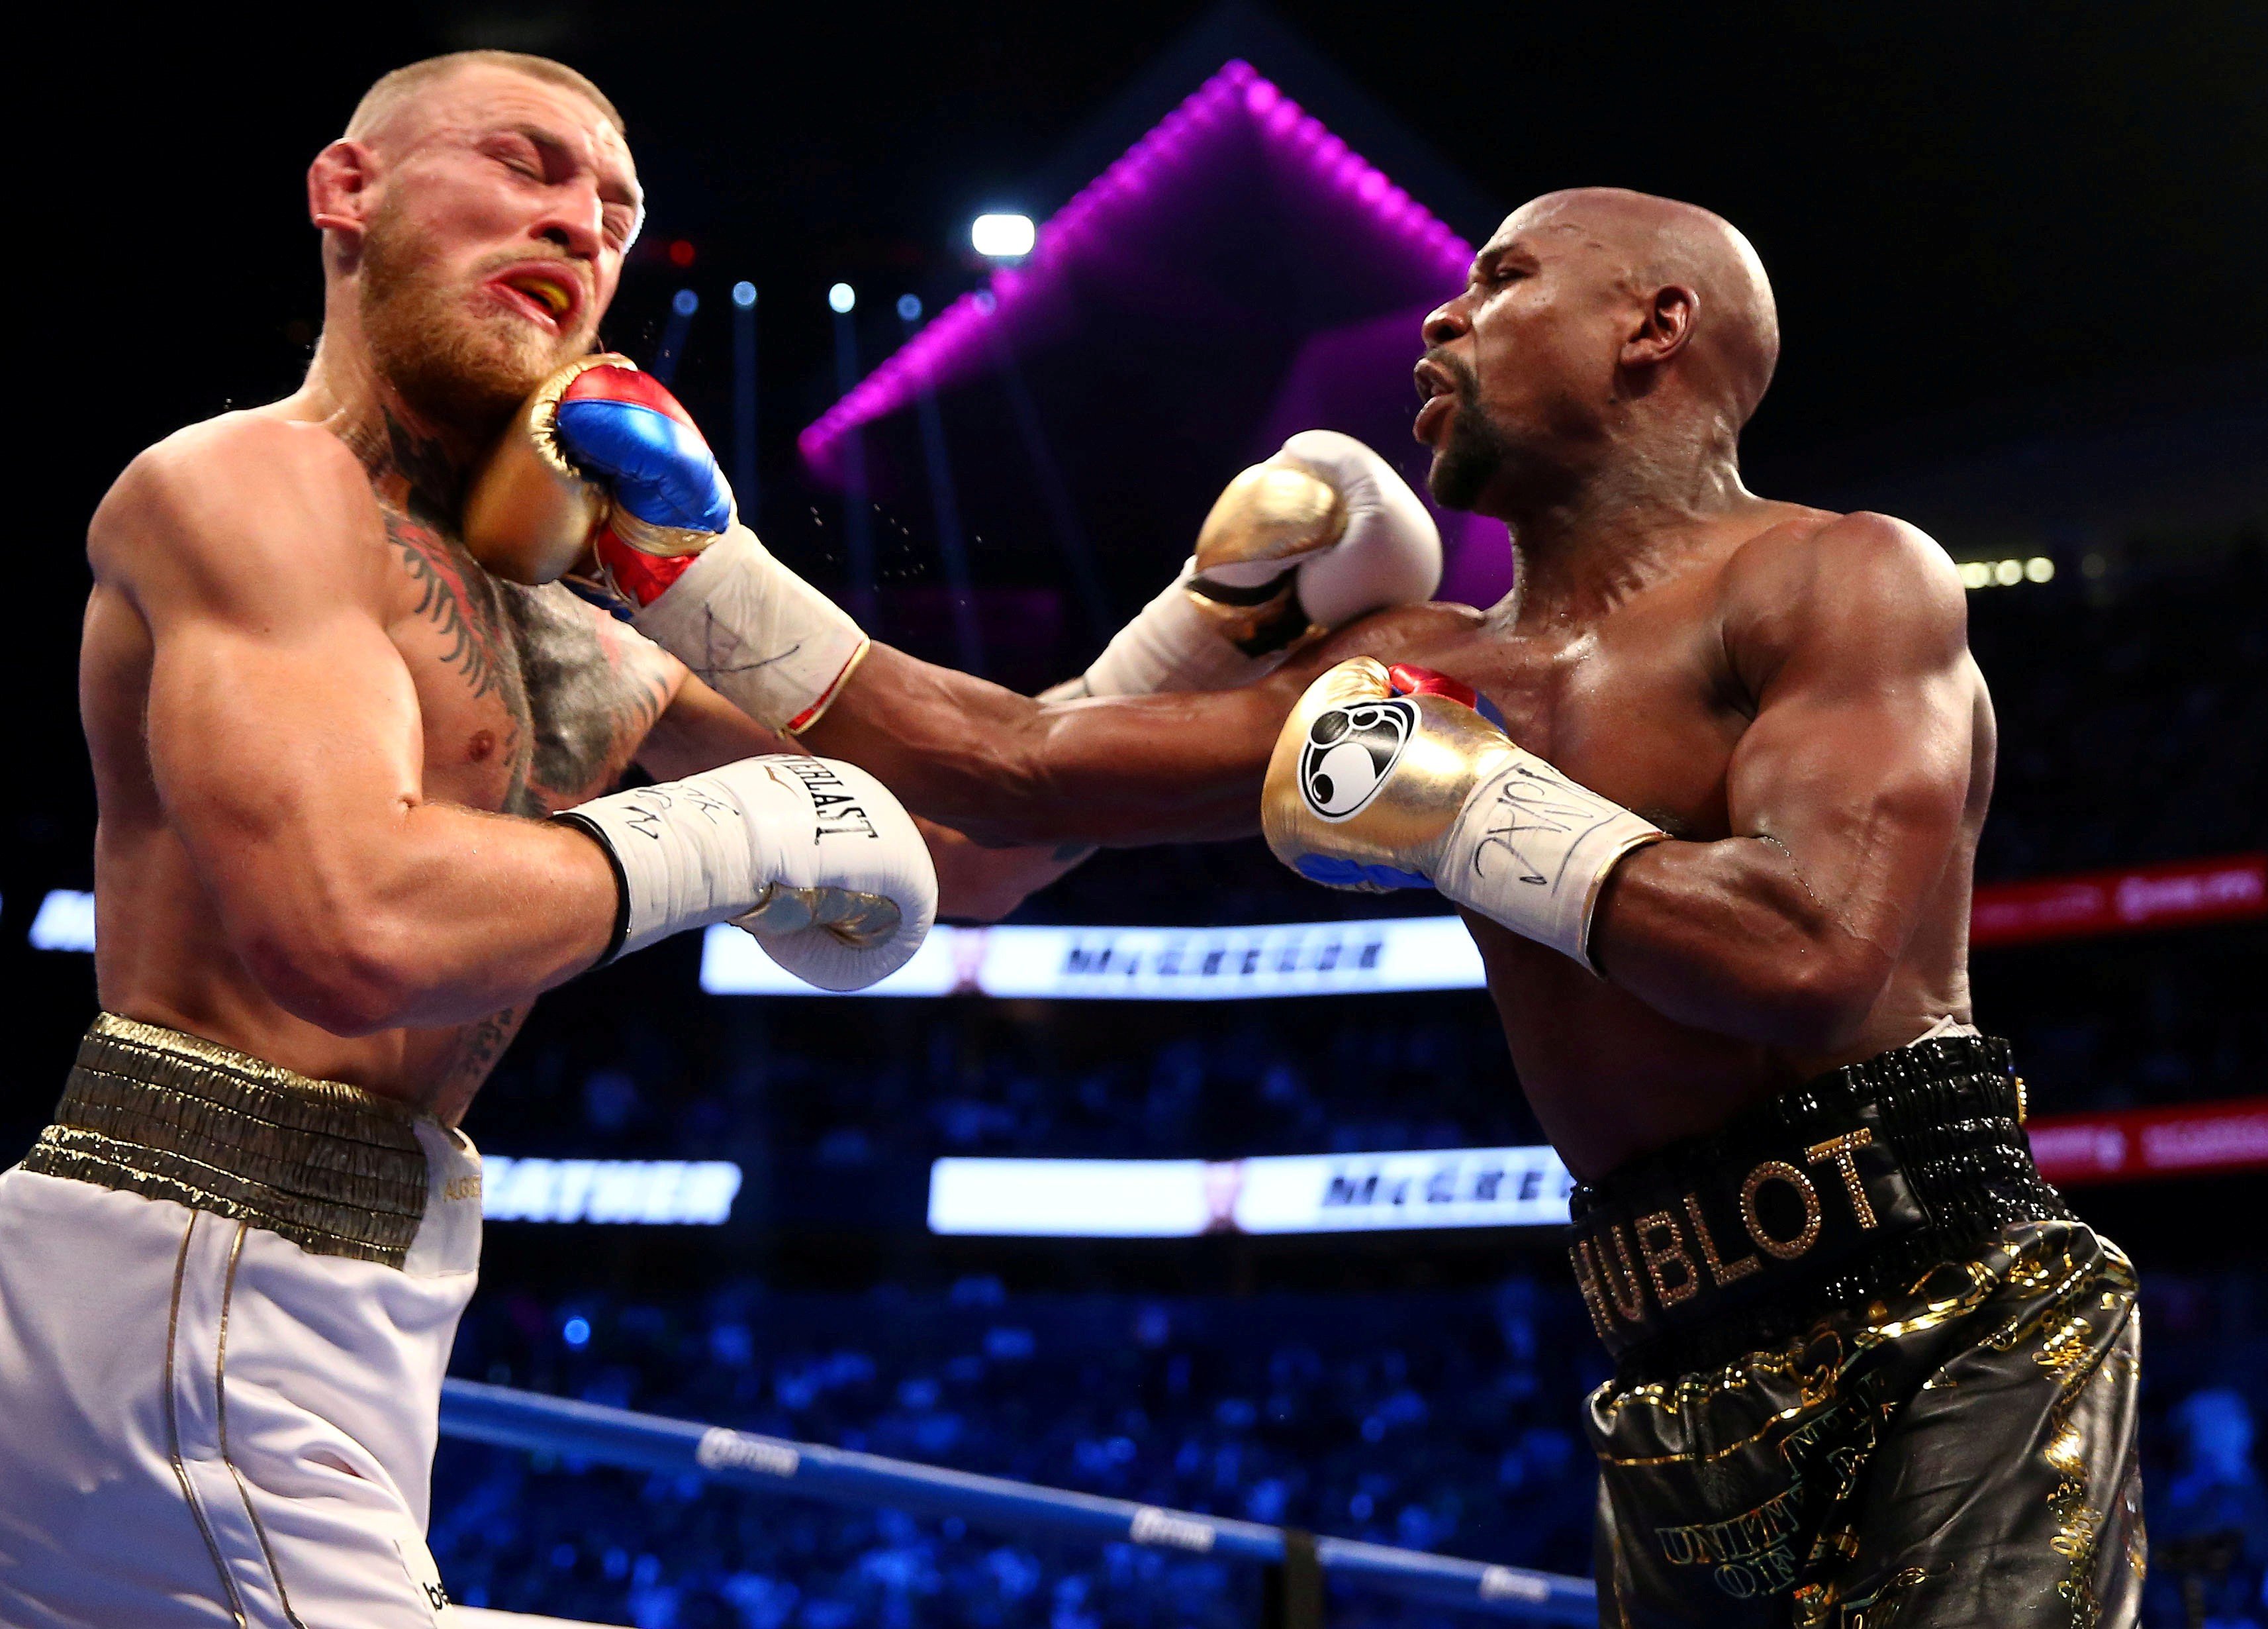 Conor McGregor (left) lost to Floyd Mayweather in his first professional boxing bout in 2017. Photo: USA Today